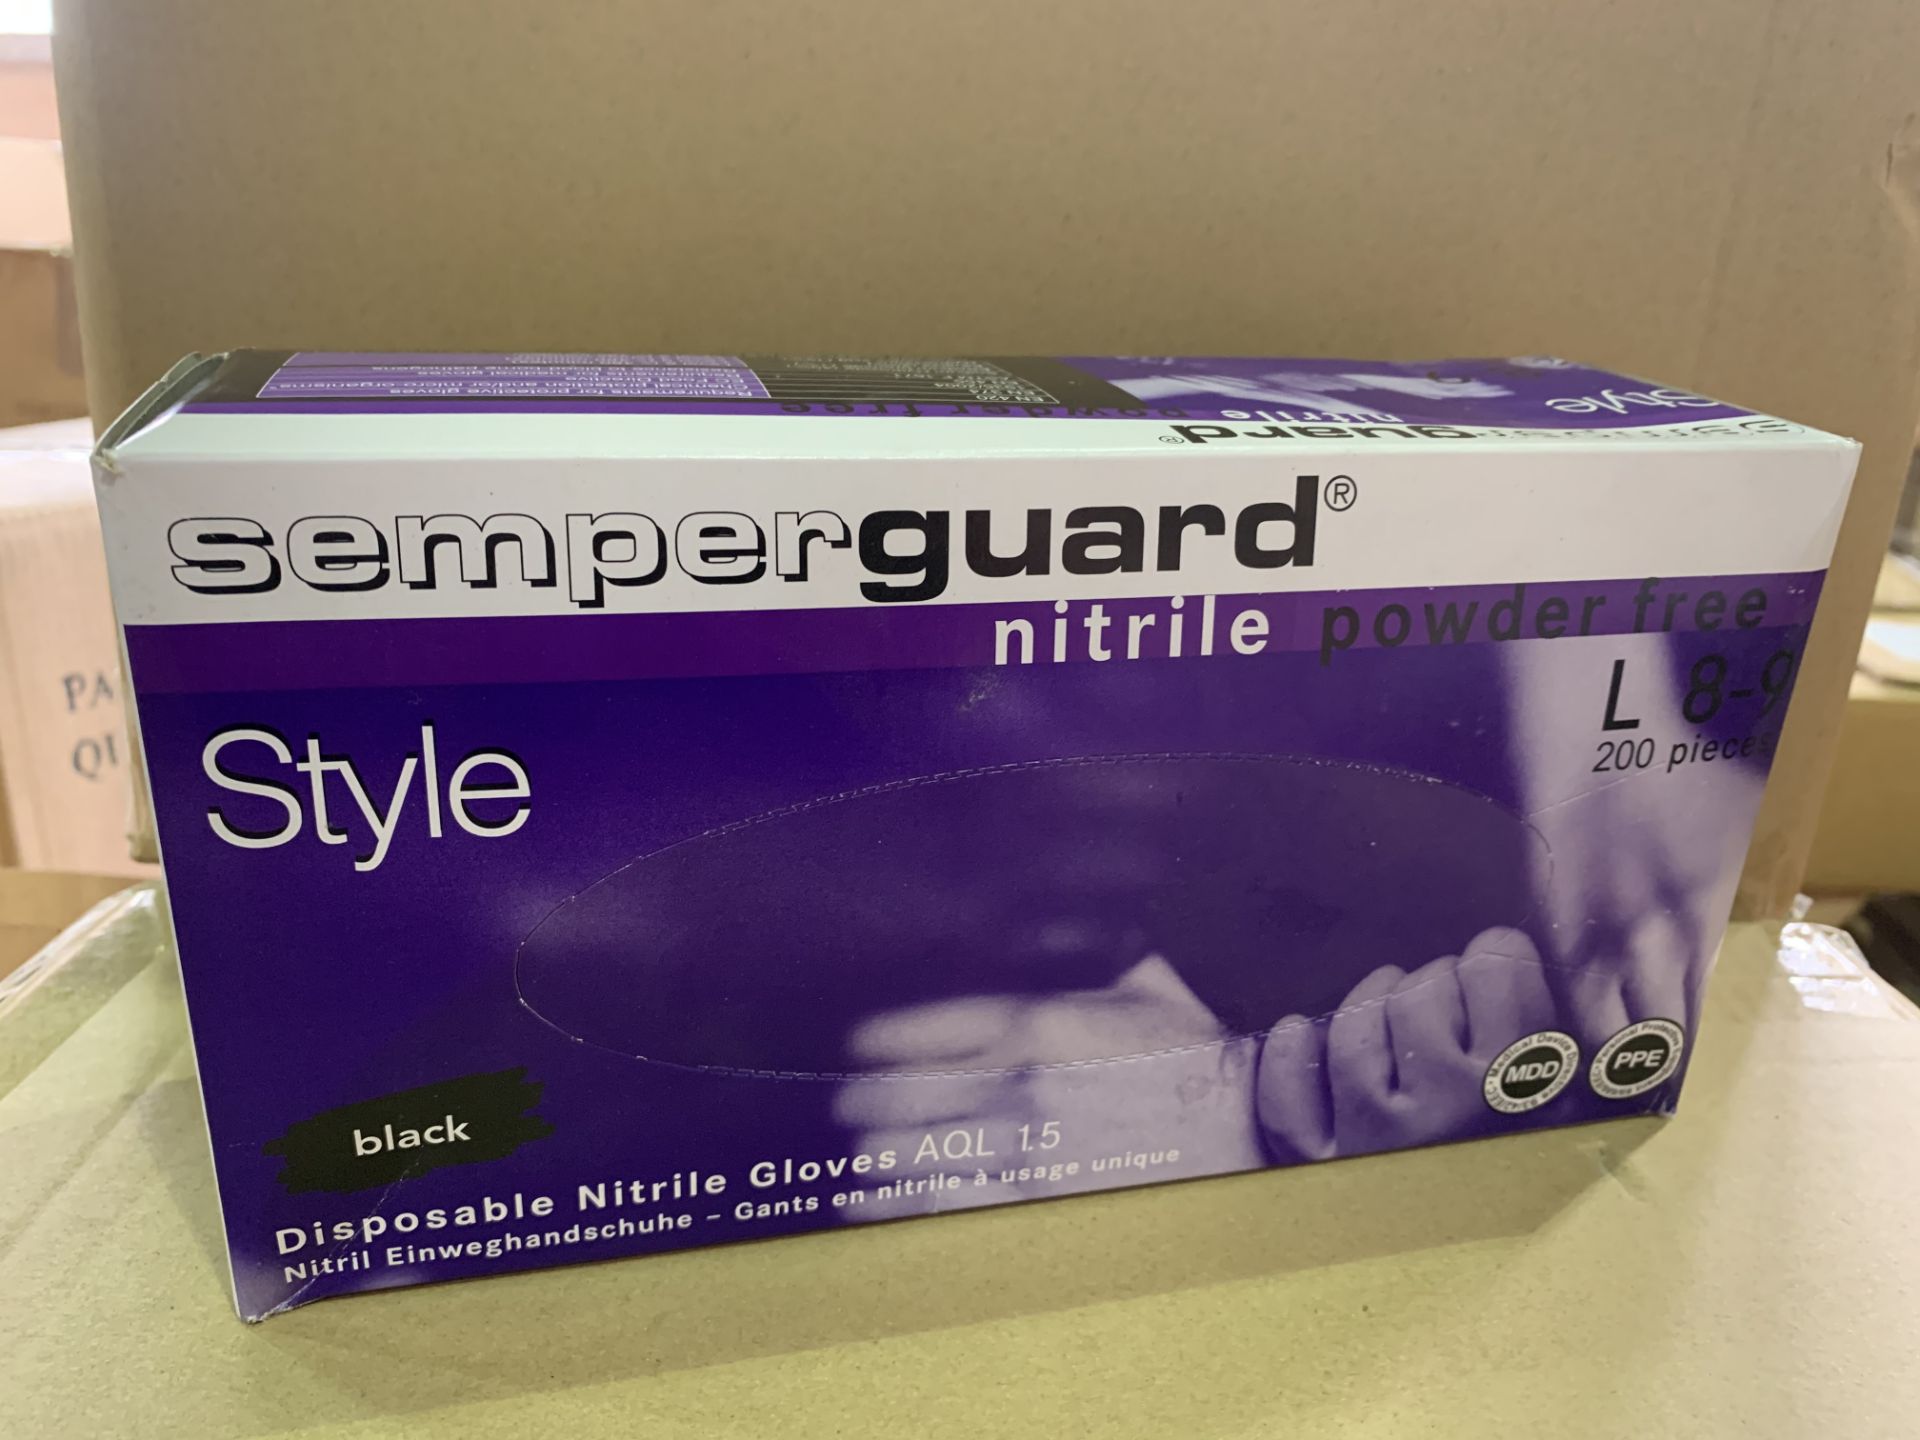 10 X PACKS OF 200 SEMPER GUARD NITRILE POWDER FREE DISPOSABLE GLOVES